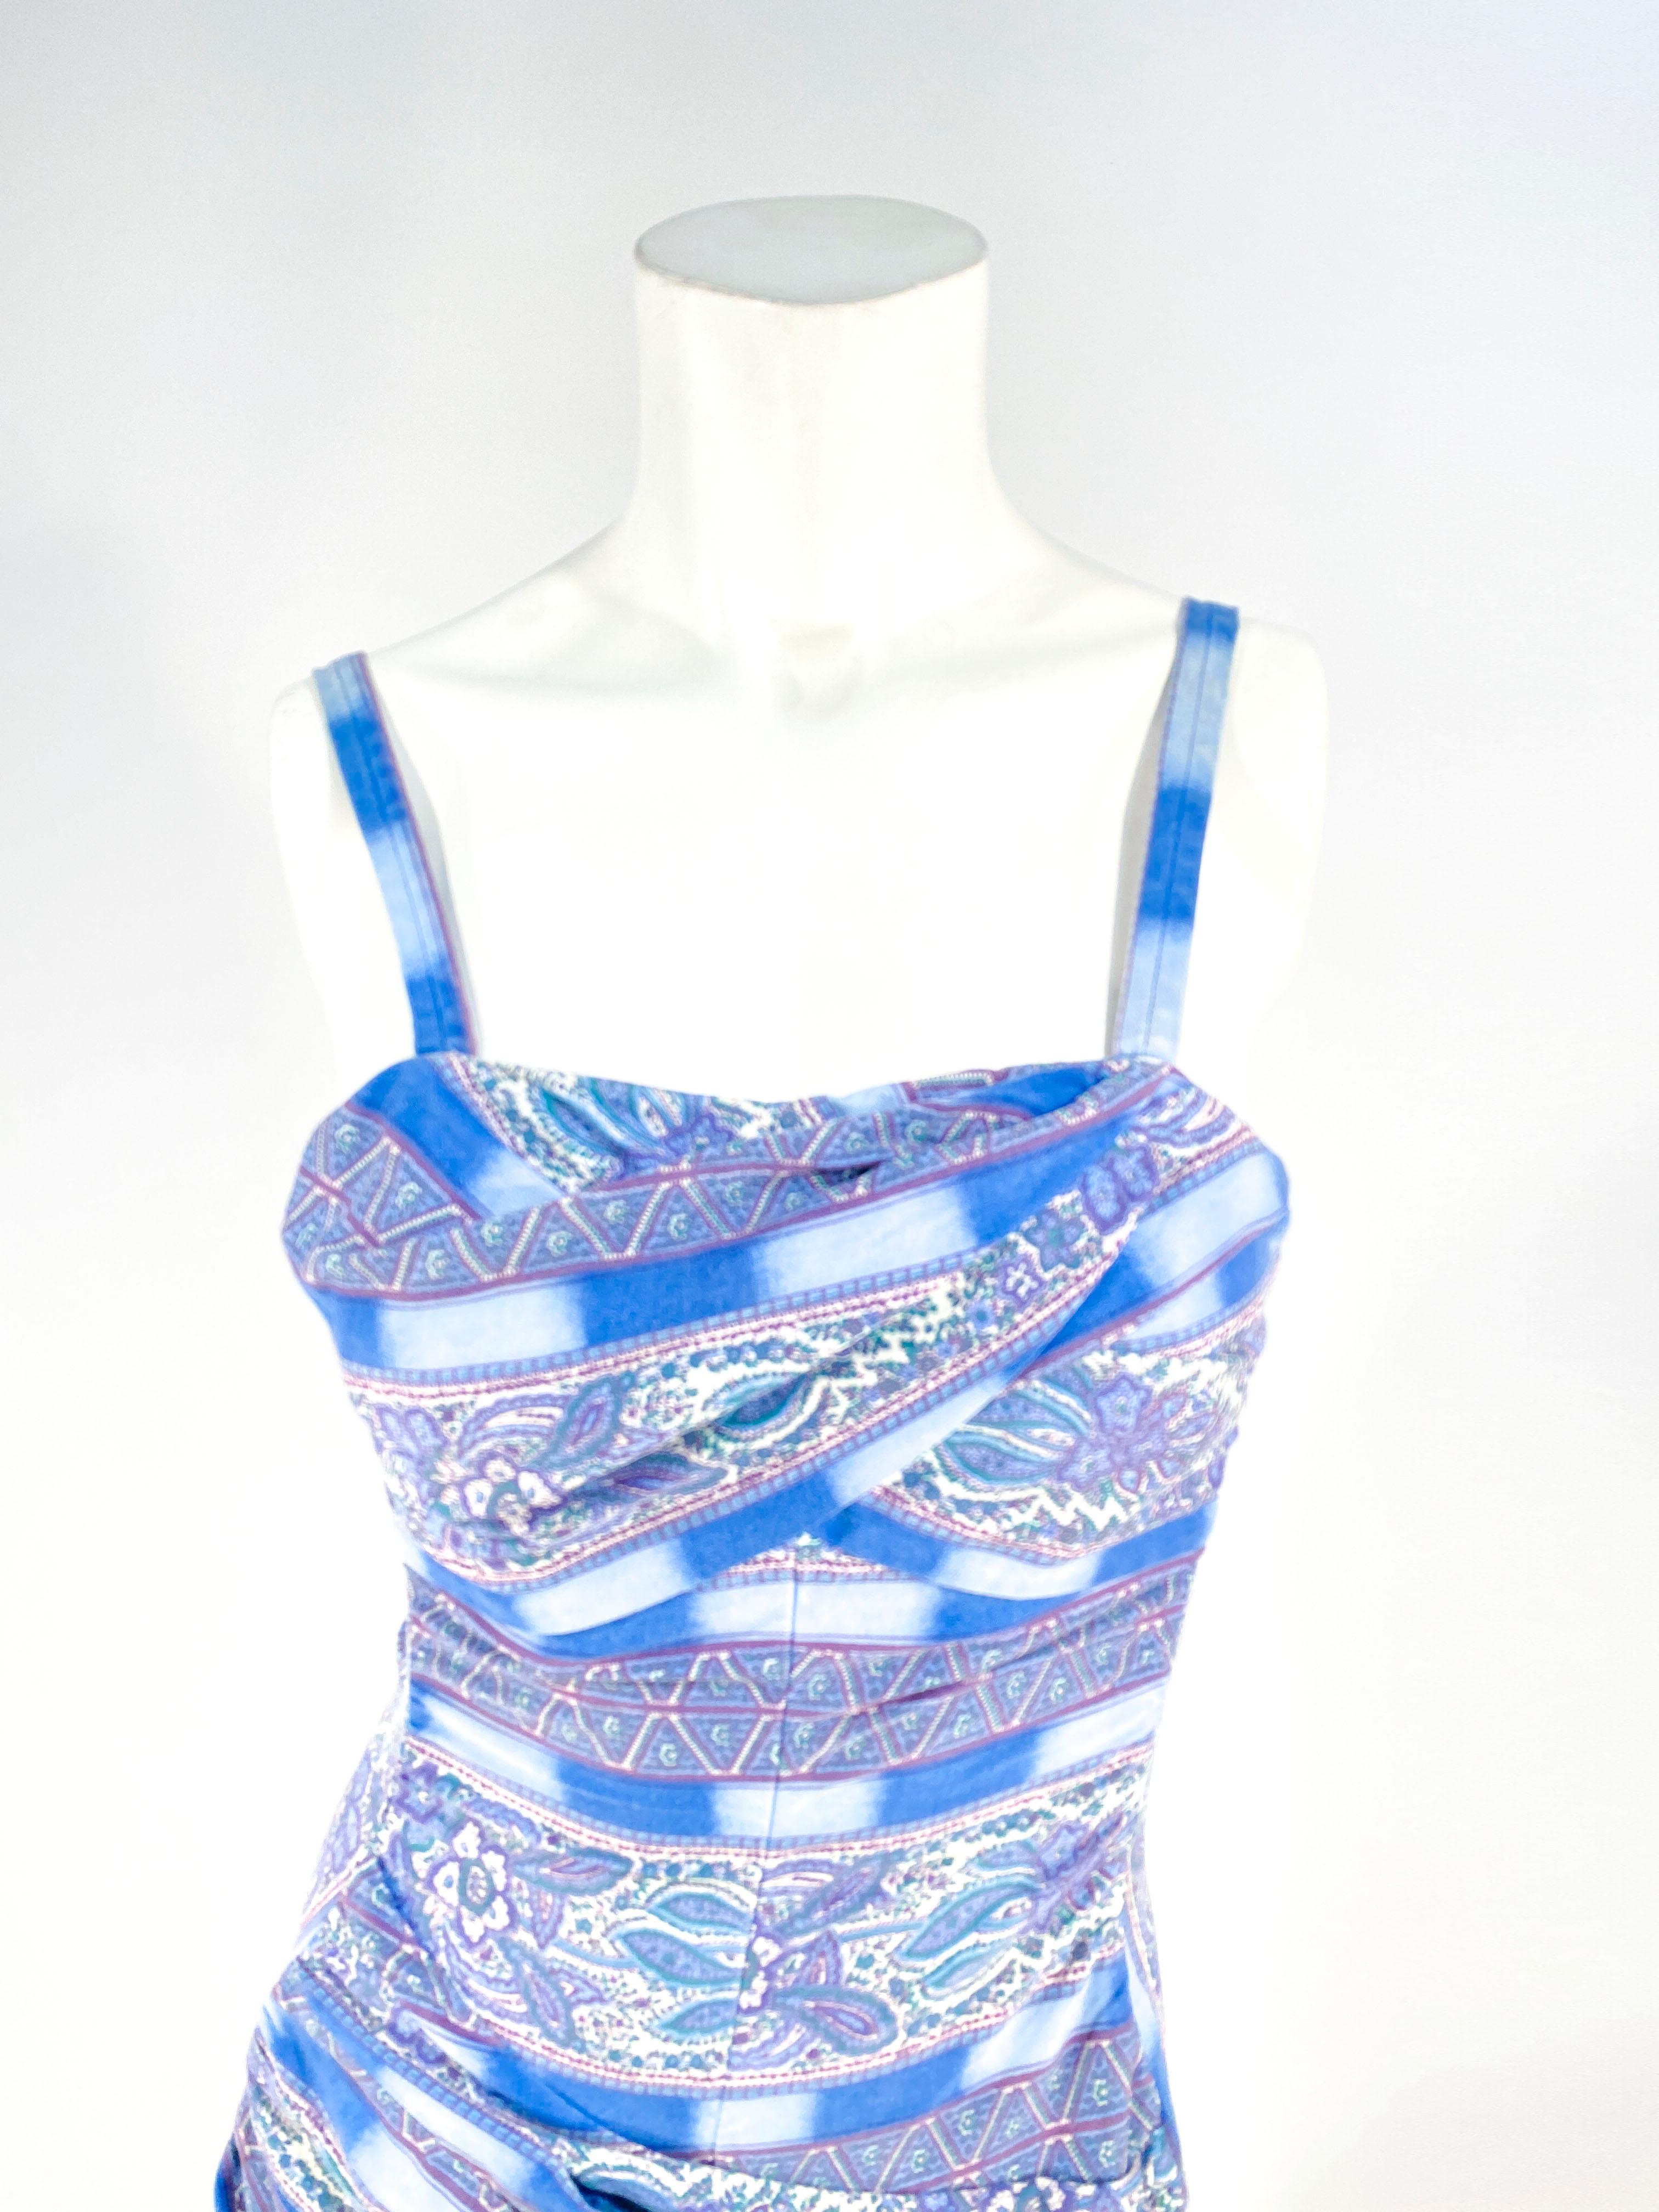 1950s Rose Marie multi-toned blue paisley & stripe printed bathing suit with a surang wrapped bodice and hip. The bodice and rib area has structured boning for support. The straps are adjustable to accommodate a more comfortable fit and the back has